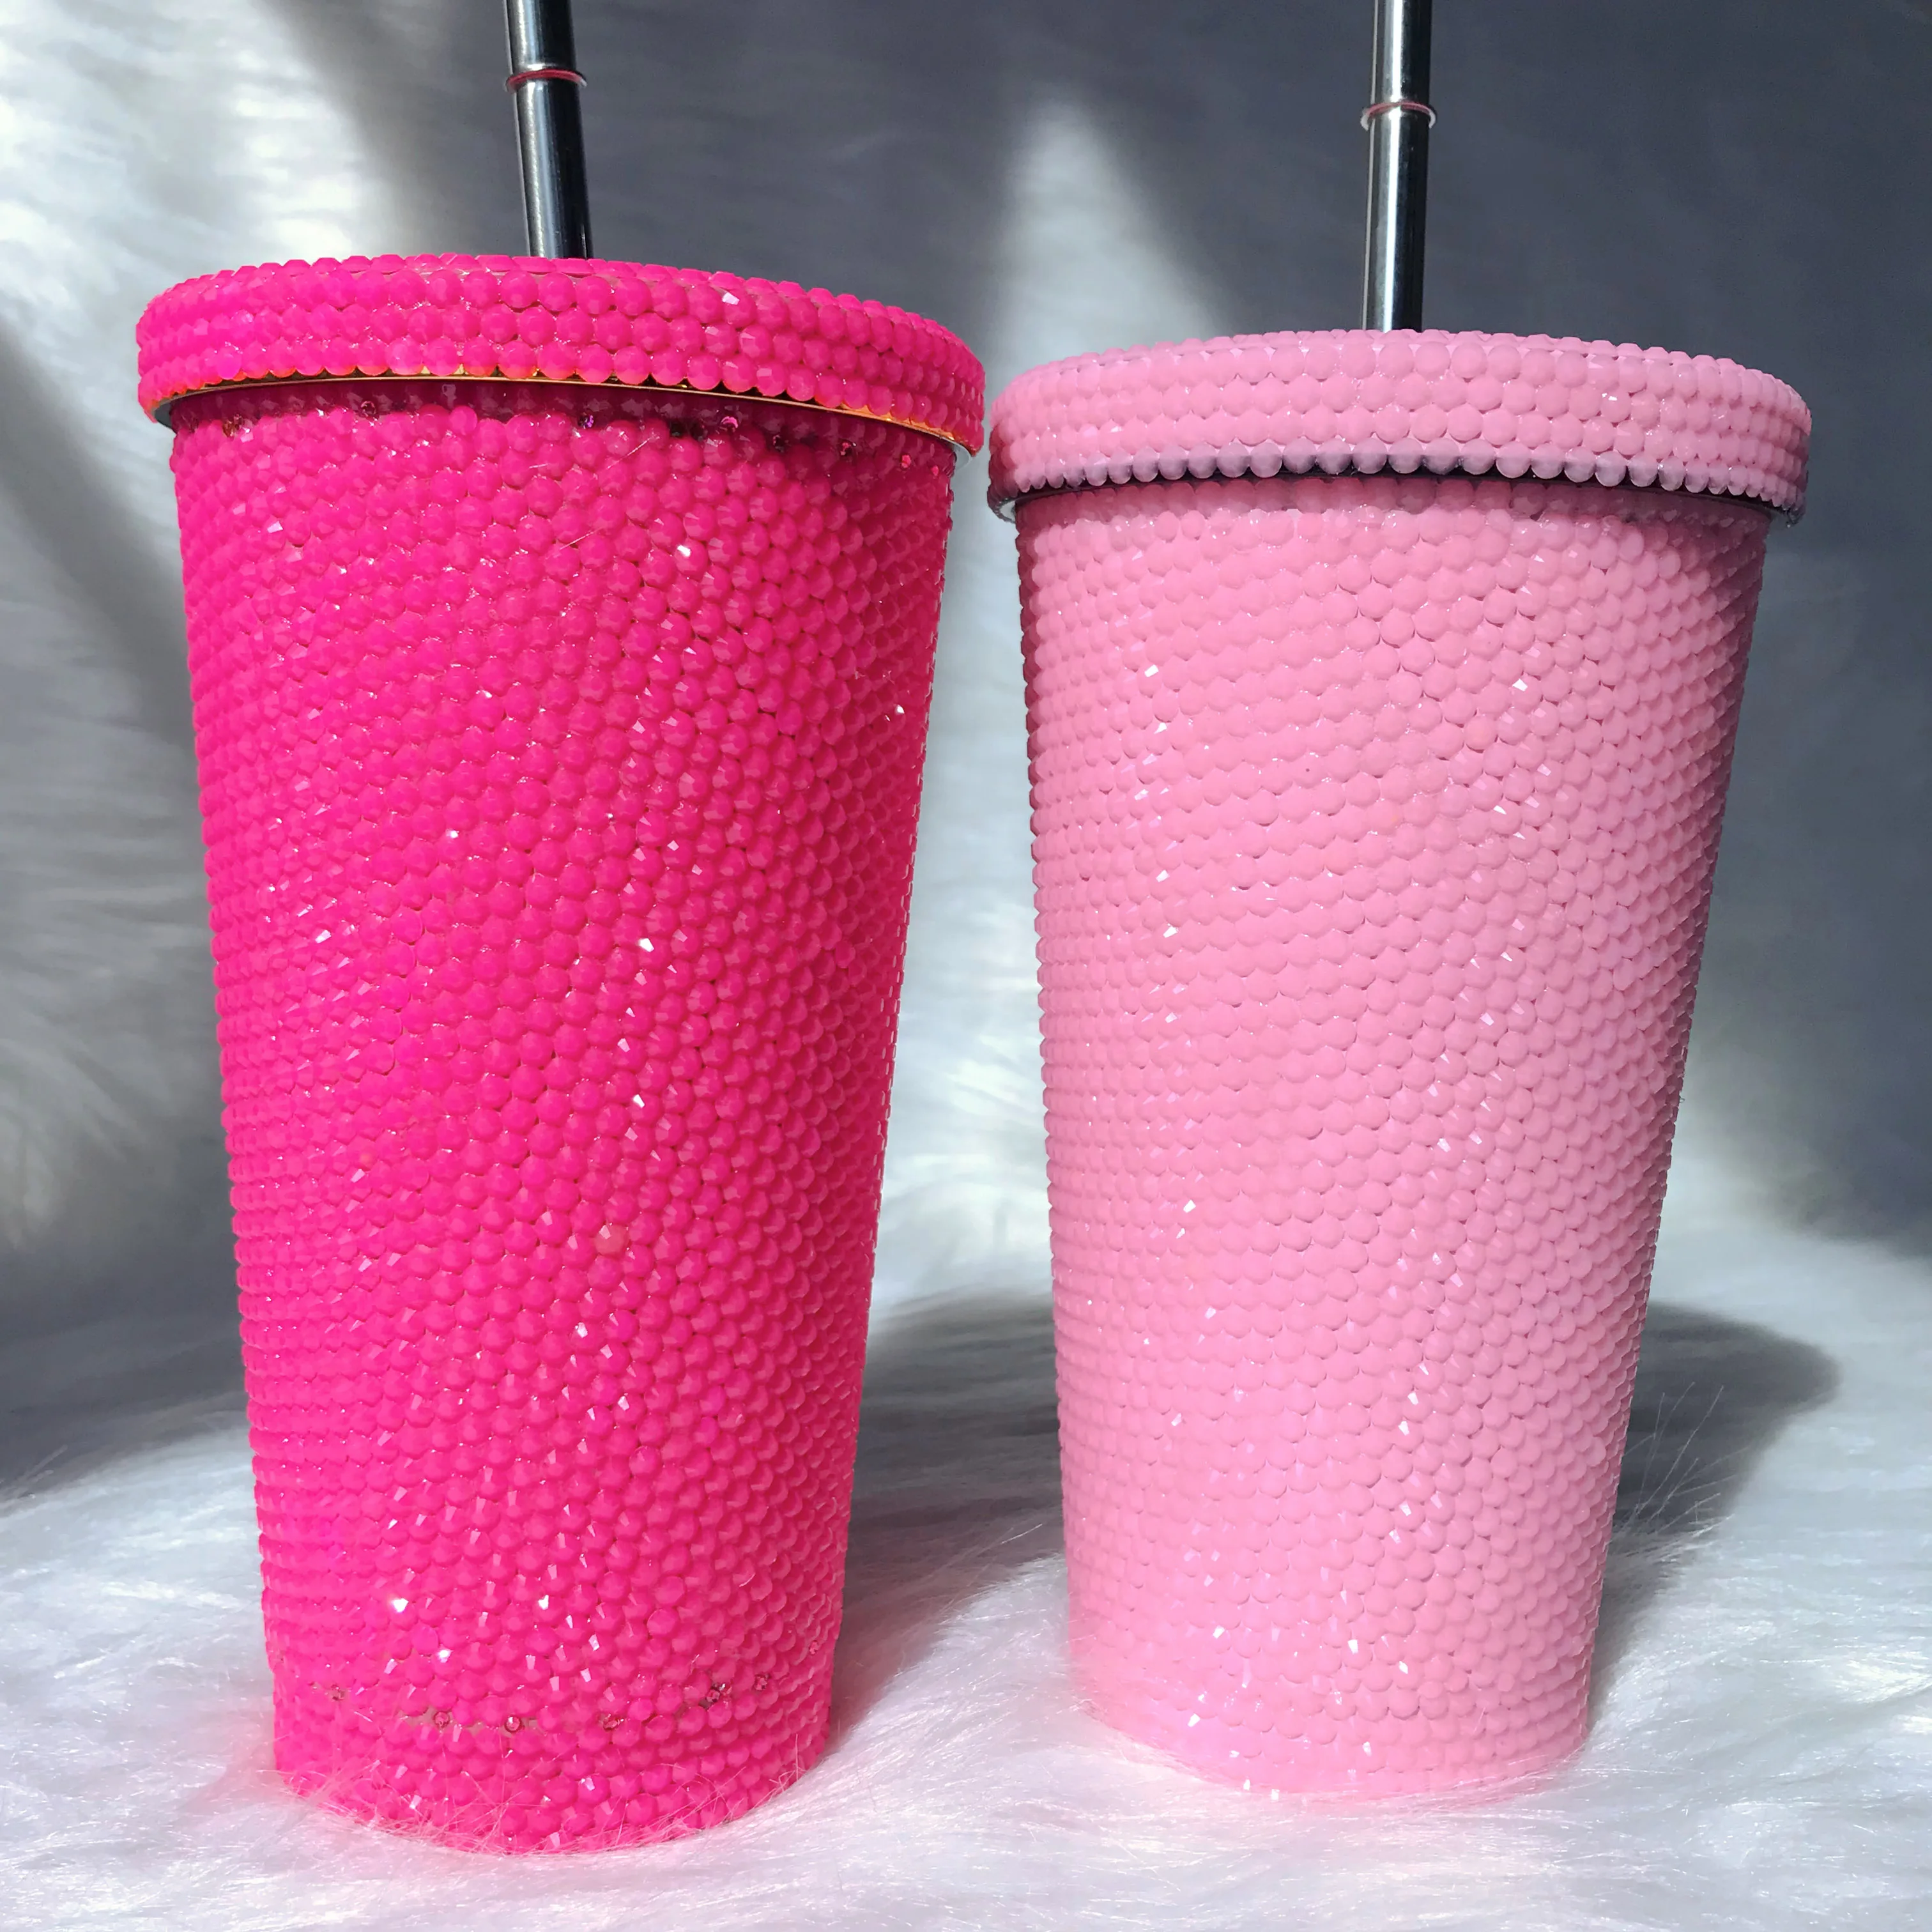 Let's Go Party Tumbler with Straw Personalize Name Hot Pink Barb Cup 16oz  BPA Free Acrylic Rubber Cute Water Bottles for Girls - AliExpress